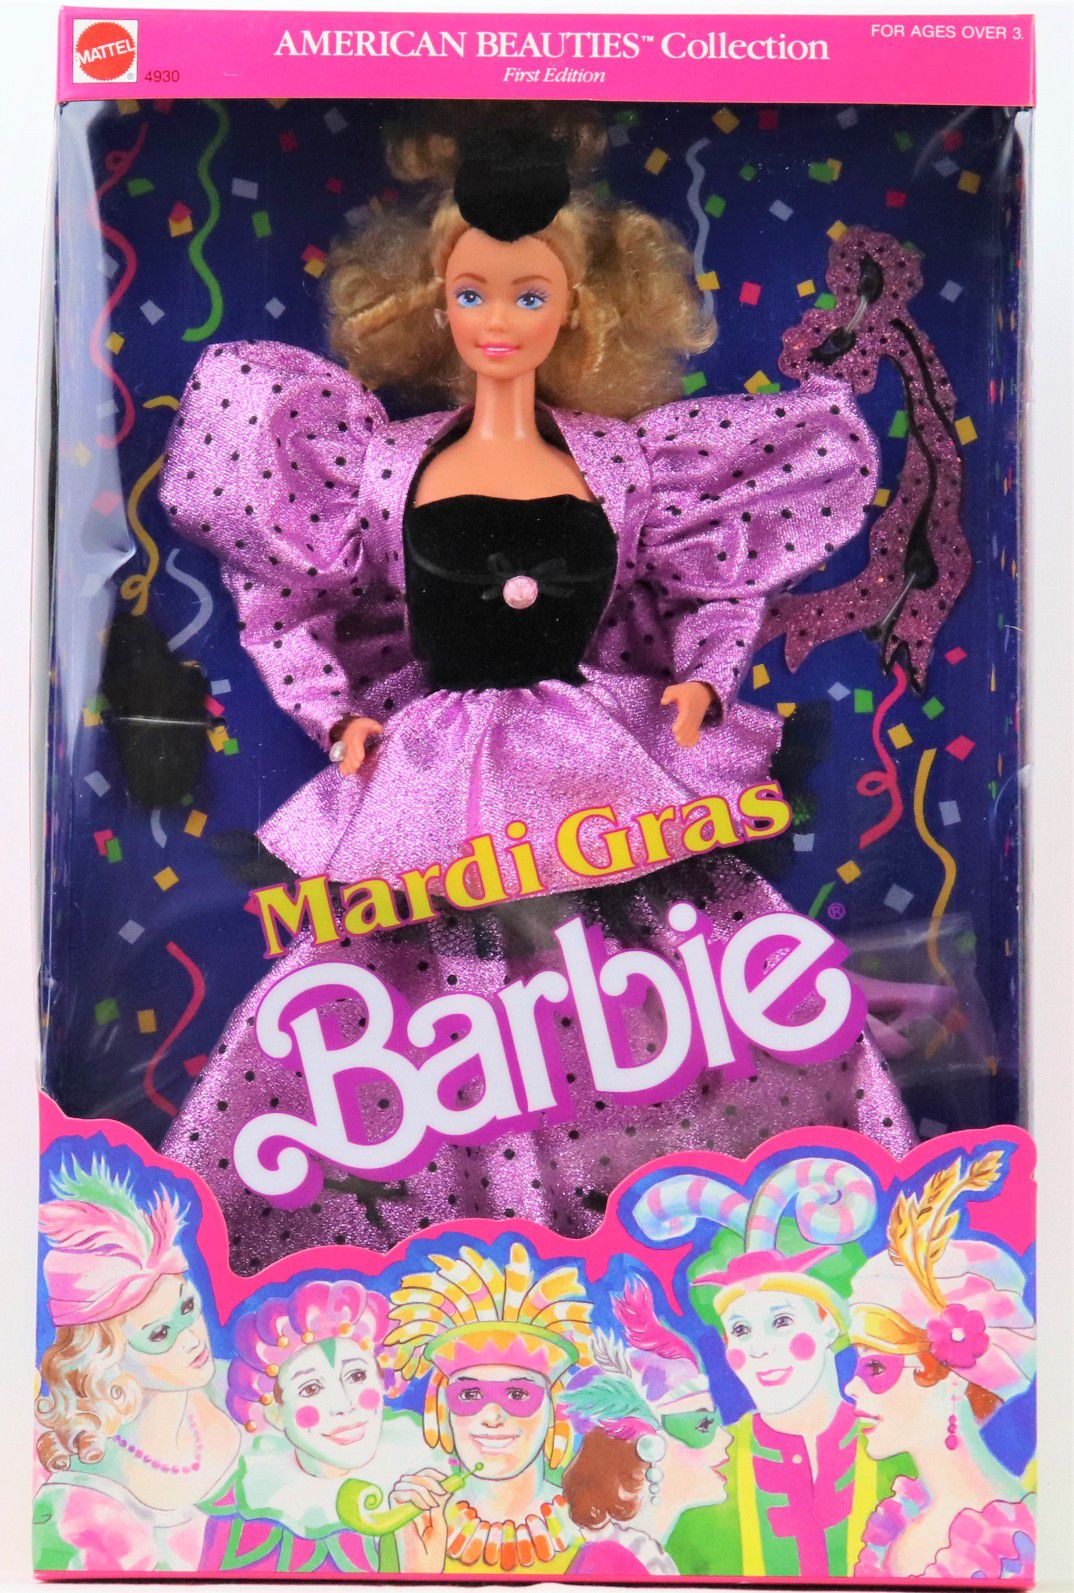 Mardi Gras Barbie Doll American Beauties Collection First Edition 1987